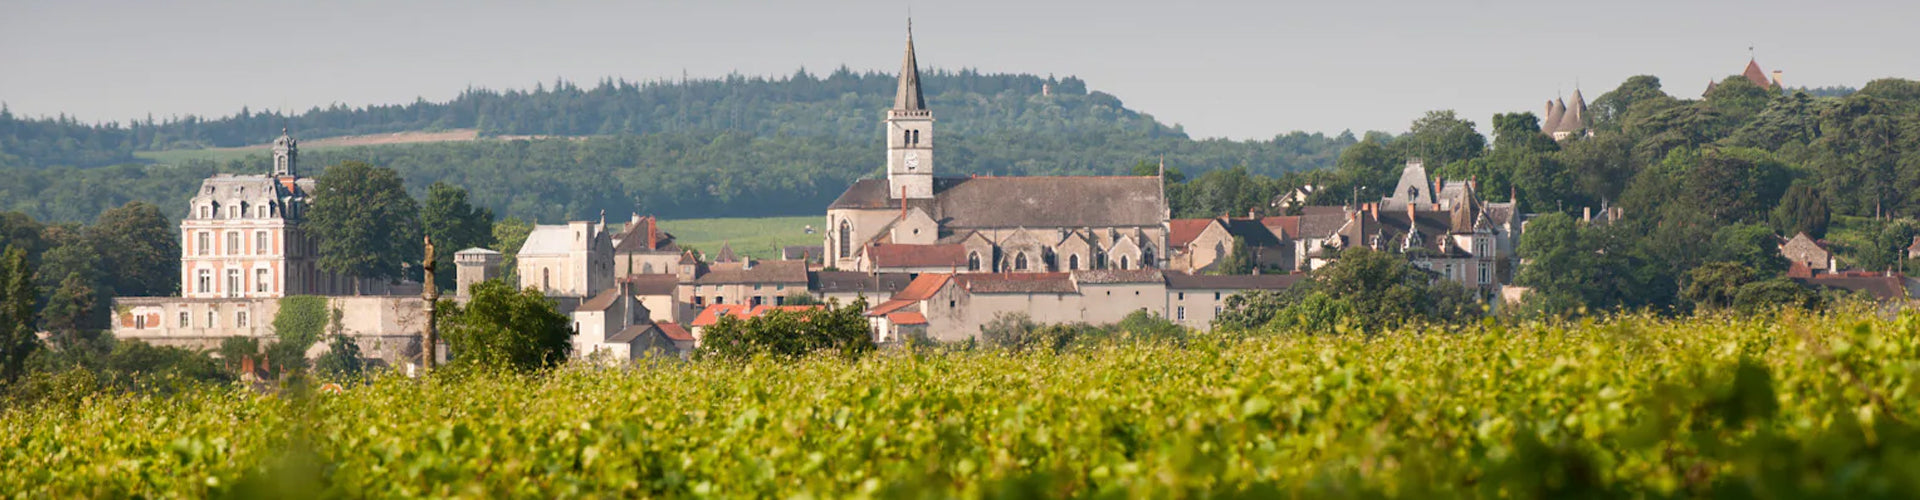 Domaine Vincent Dureuil Janthial Vineyards in Rully